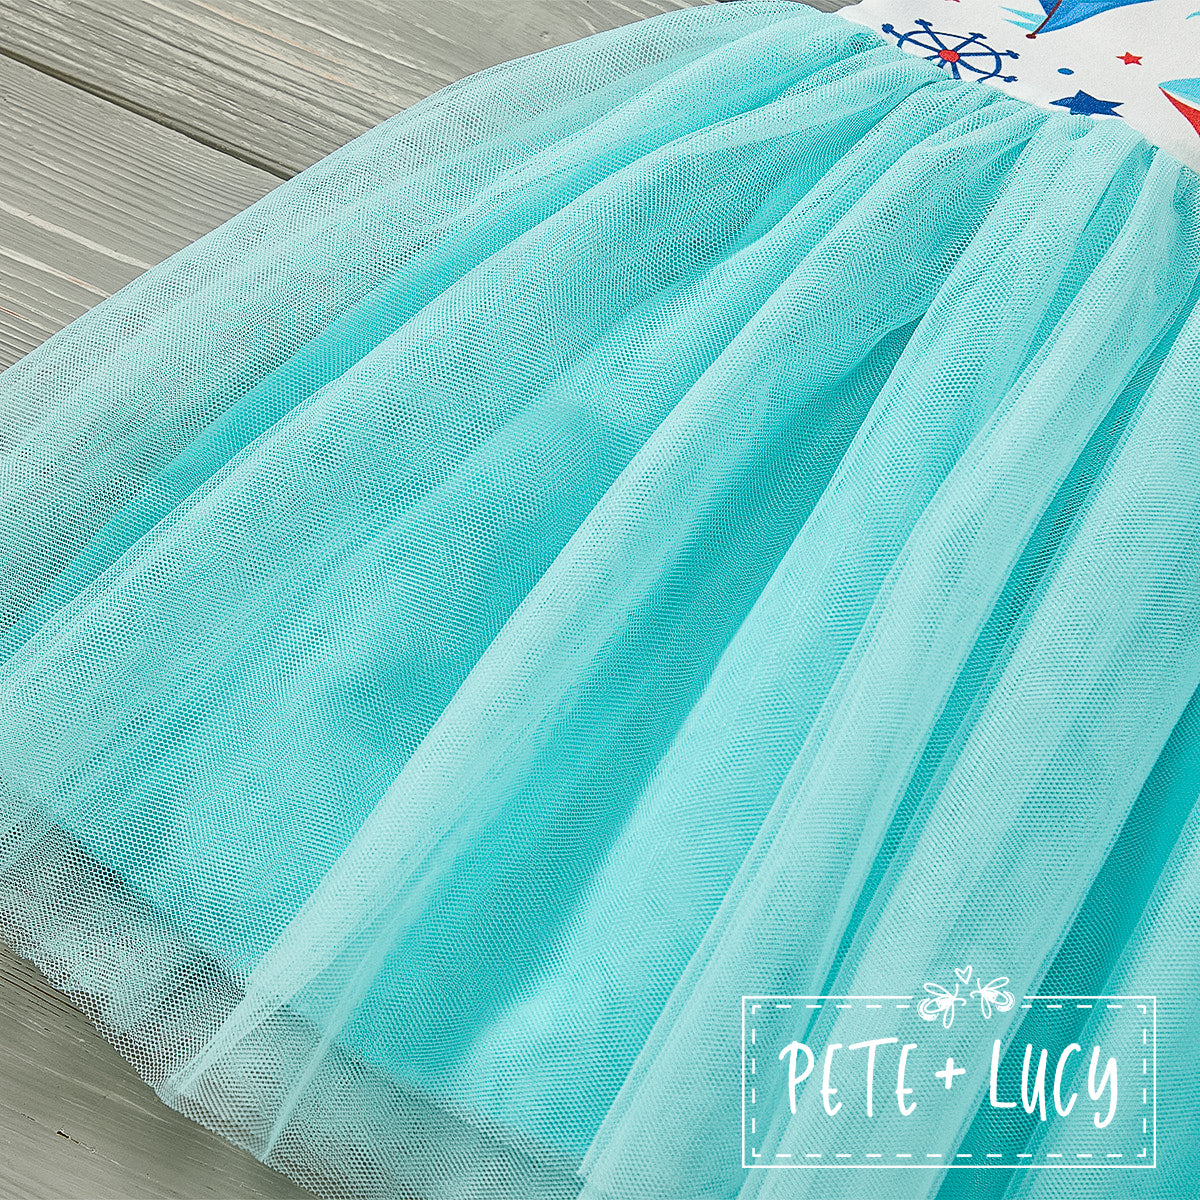 Come Sail With Me: Tulle Dress